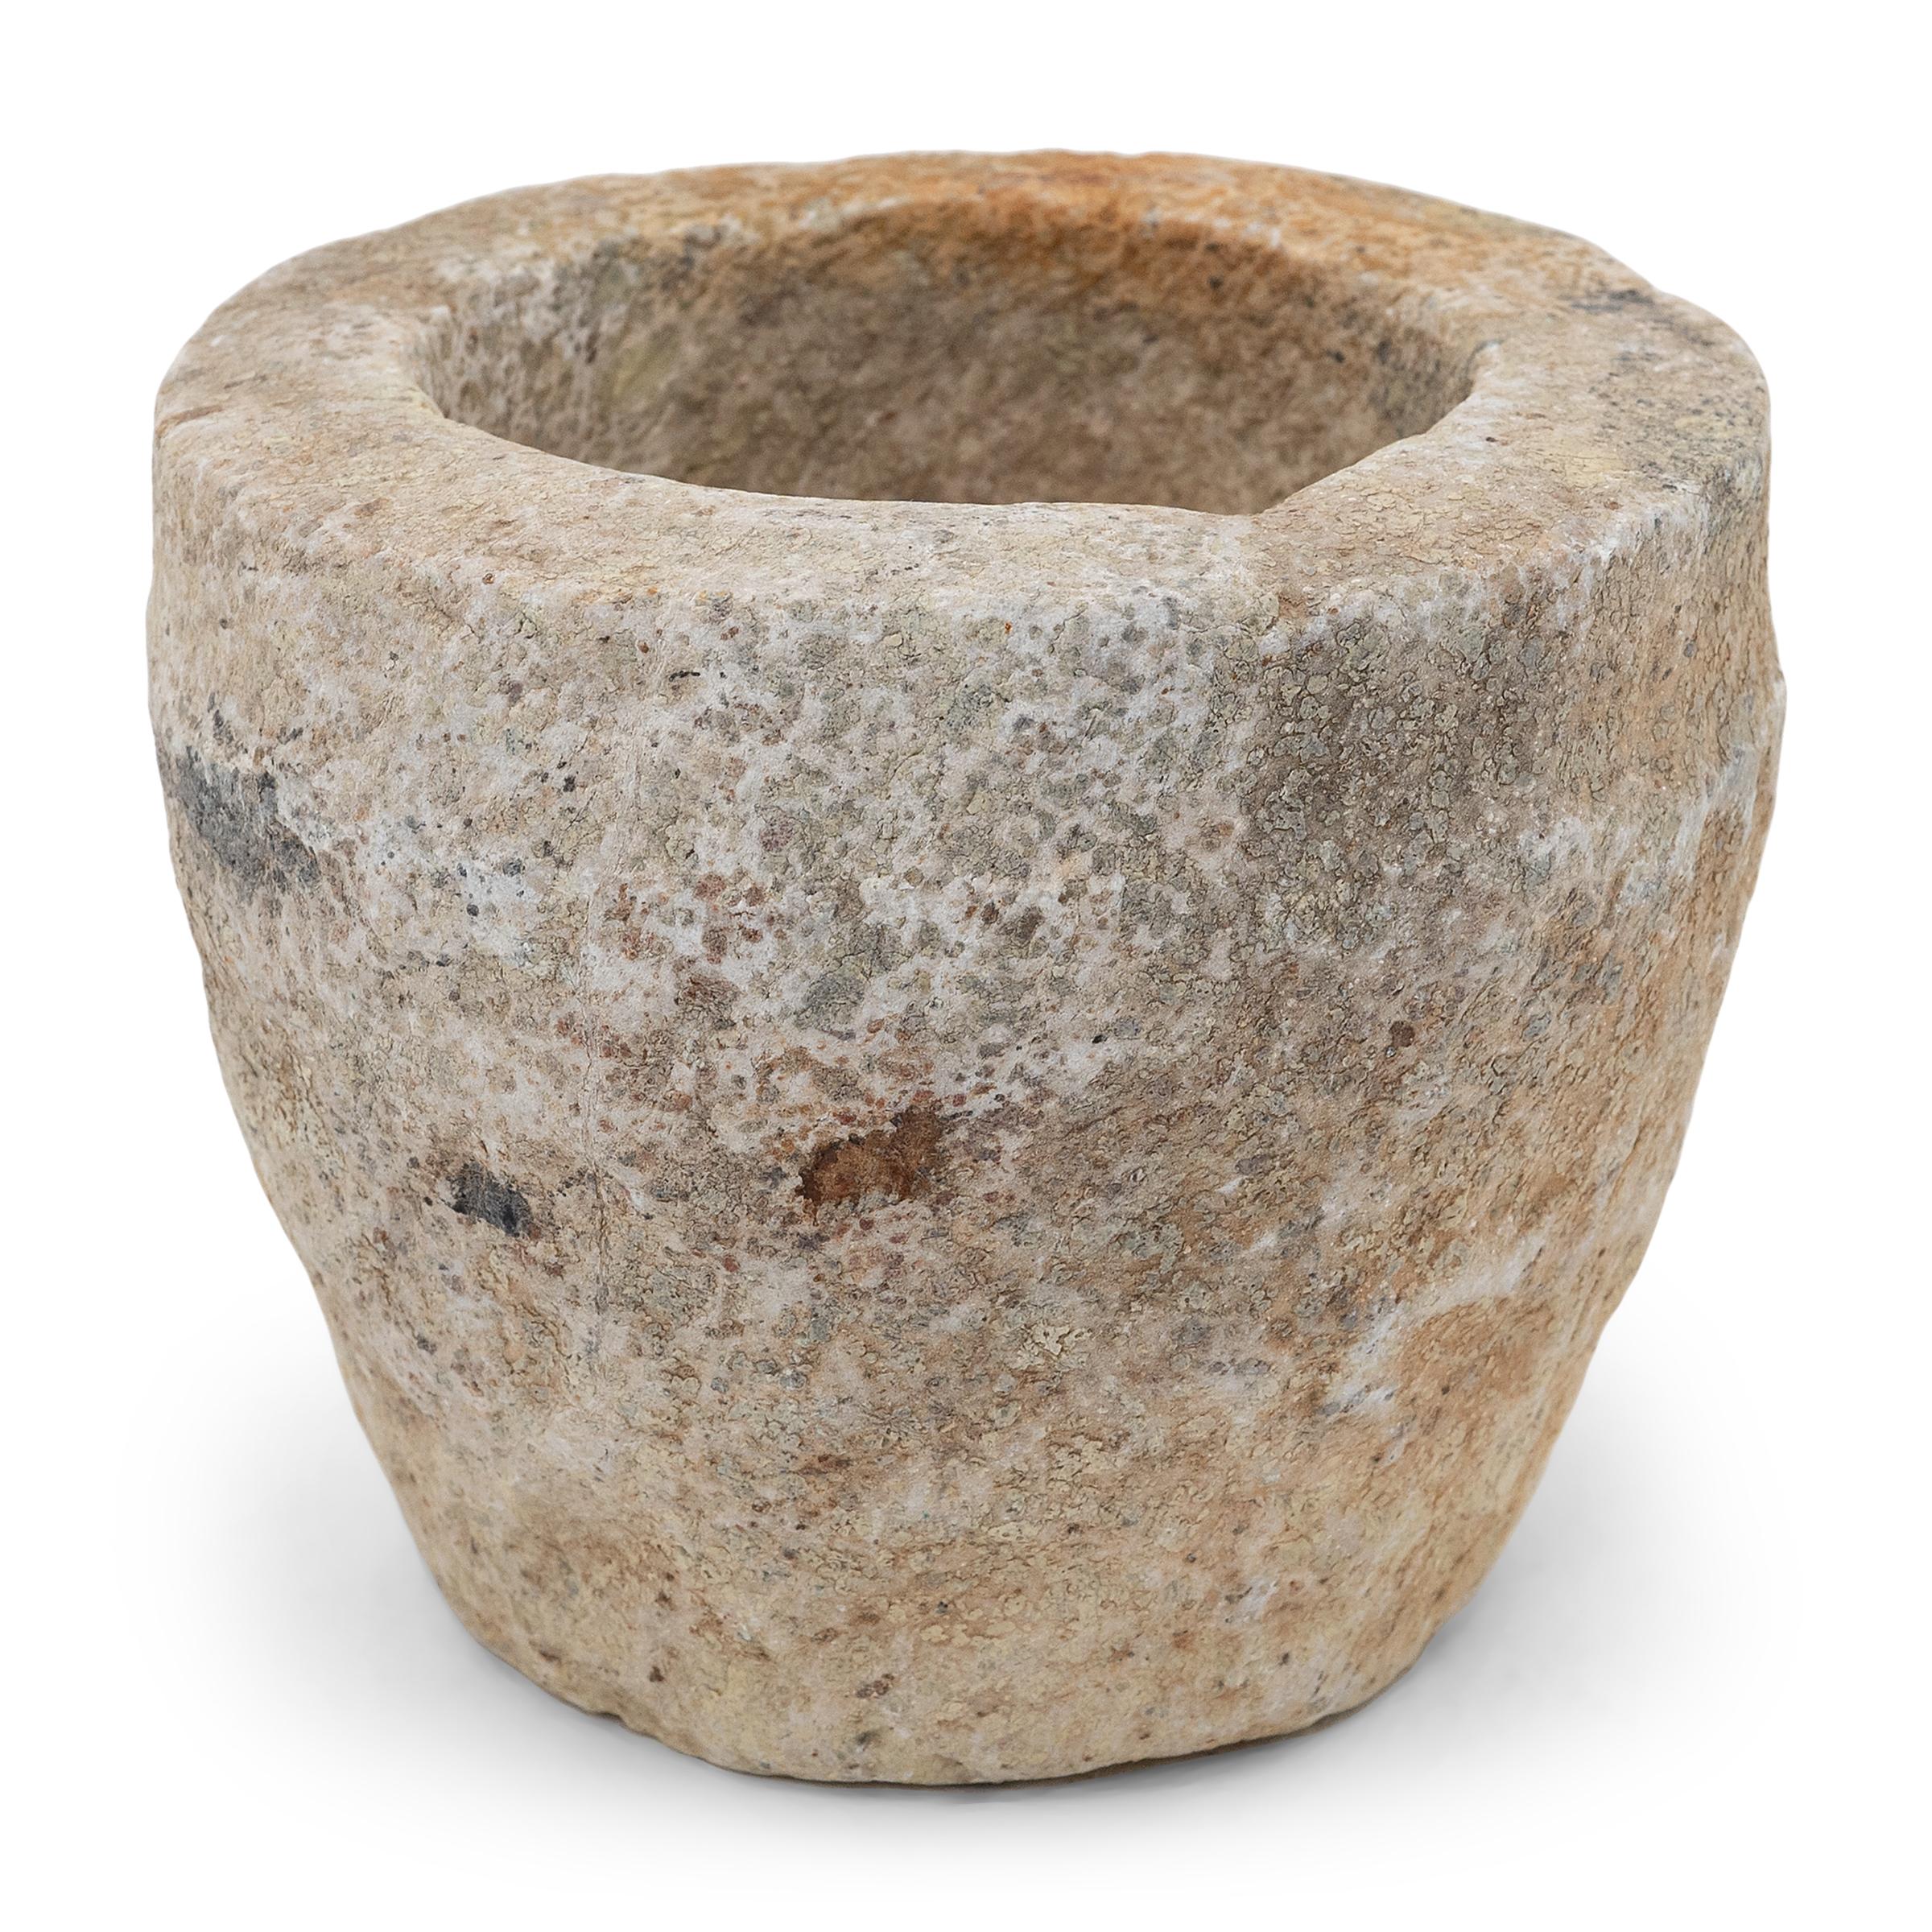 Carved from a single block of limestone, this stone vessel is an early 19th century mortar once used to grind spices, herbs, and other condiments. The hand chiseled, rustic exterior is worn gorgeously with age while the interior is smooth from daily